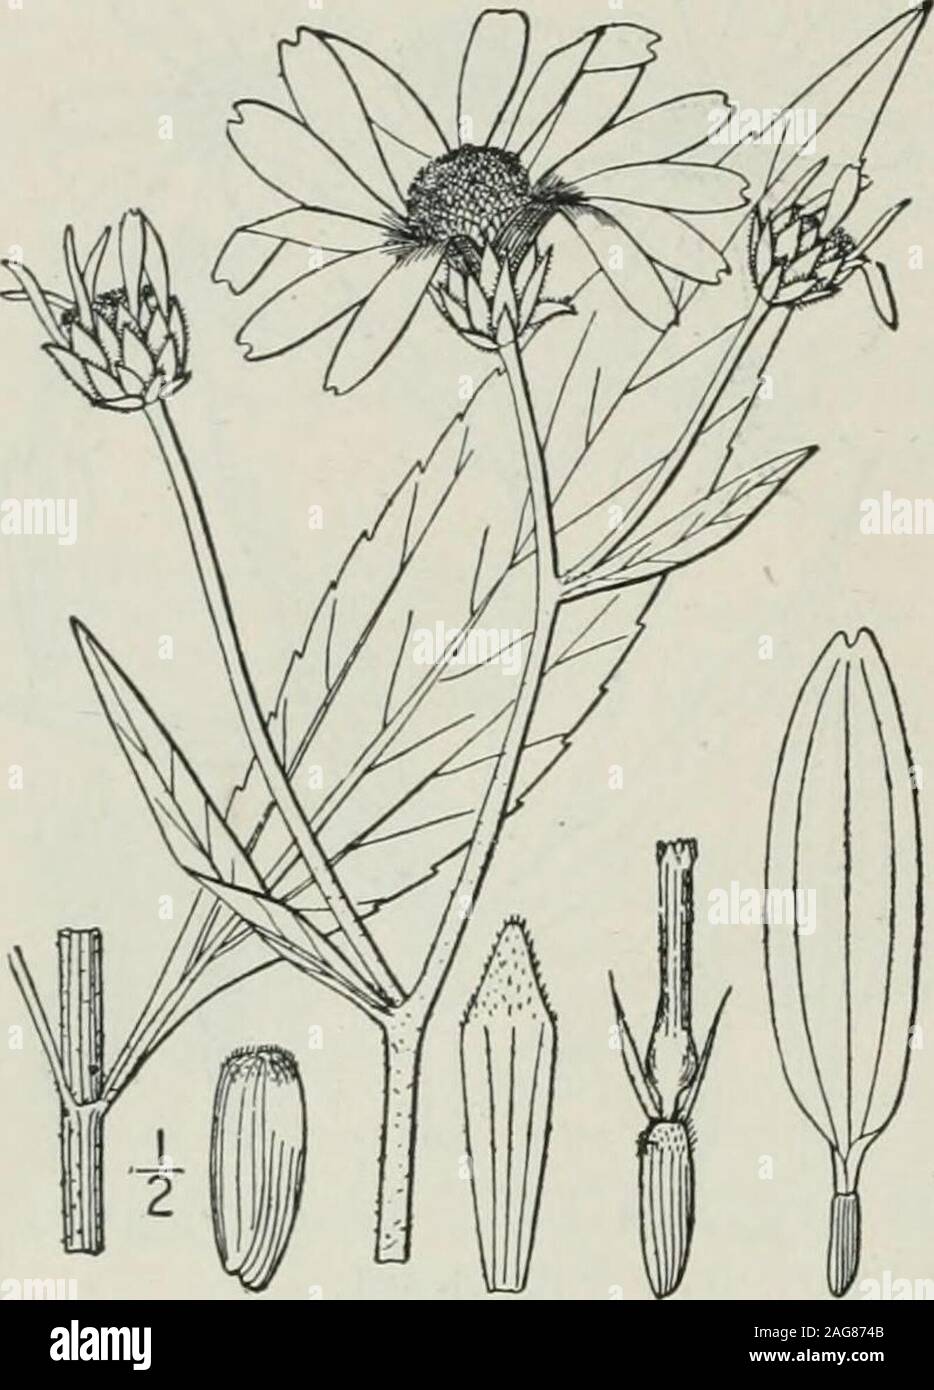 . An illustrated flora of the northern United States, Canada and the British possessions : from Newfoundland to the parallel of the southern boundary of Virginia and from the Atlantic Ocean westward to the 102nd meridian. 4S0 COMPOSITAE. Vol. hi.. 6. Helianthus scaberrimus Ell. Stiff Sun-flower. Fig. 4466. H. scaberrimus Ell. Bot. S. C. & Ga. 2: 423. 1824.H. rigidus Desf. Cat. Hort. Paris, Ed. 3, 184. 1829. Perennial; stems simple or little branched, hispidor scabrate, i°-8° high. Leaves thick, coriaceous,serrate or serrulate, very scabrous on both sides, 2-ylong, ¥-2 wide, acute at the apex, Stock Photo